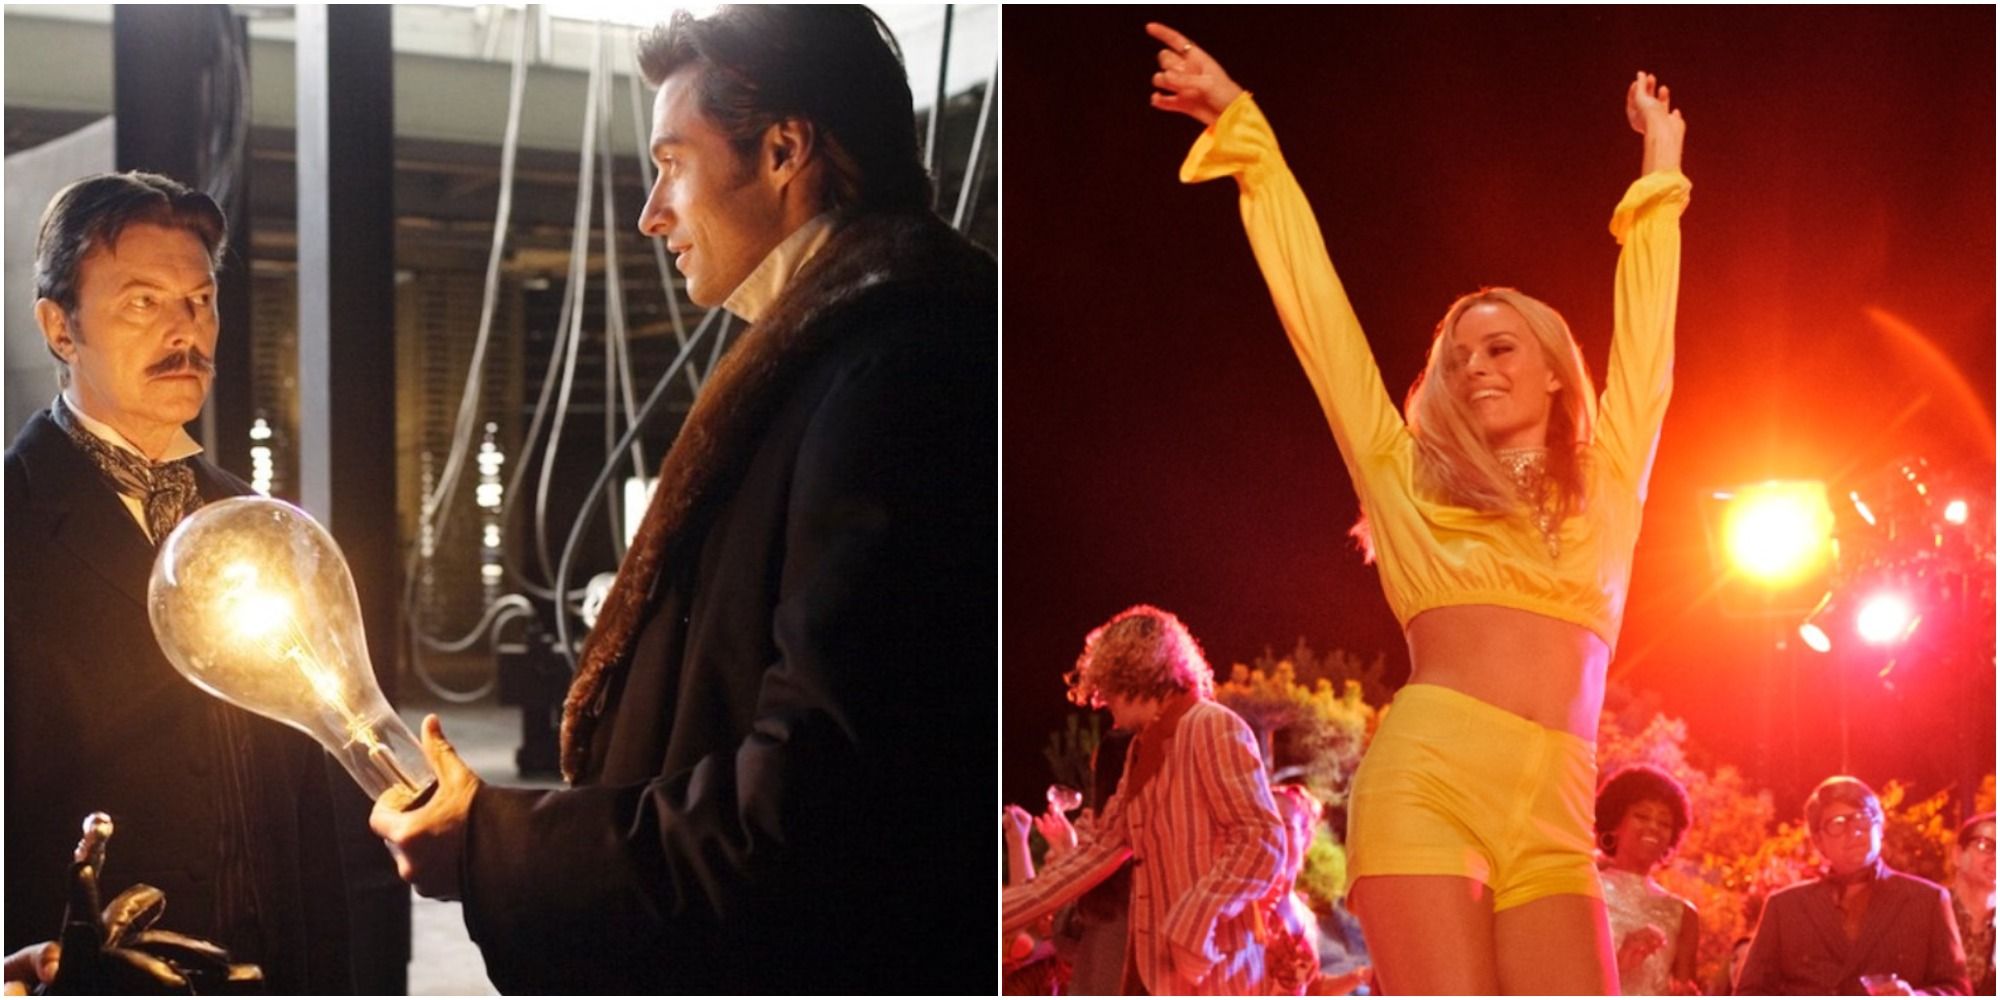 Split Image showing stills from The Prestige and Once Upon a Time in Hollywood